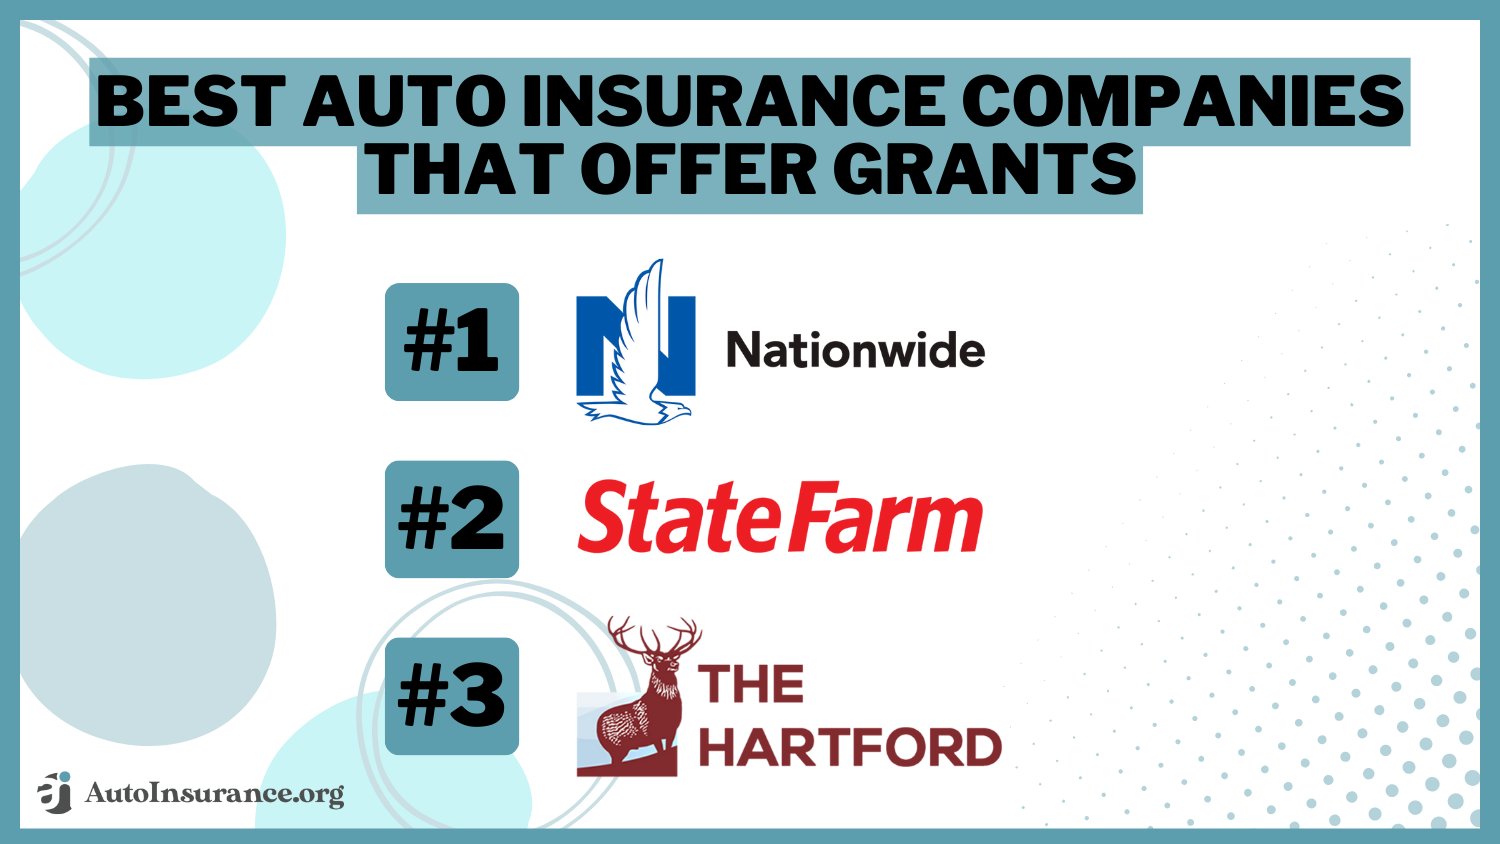 Best Auto Insurance Companies That Offer Grants: Nationwide, State Farm, The Hartford